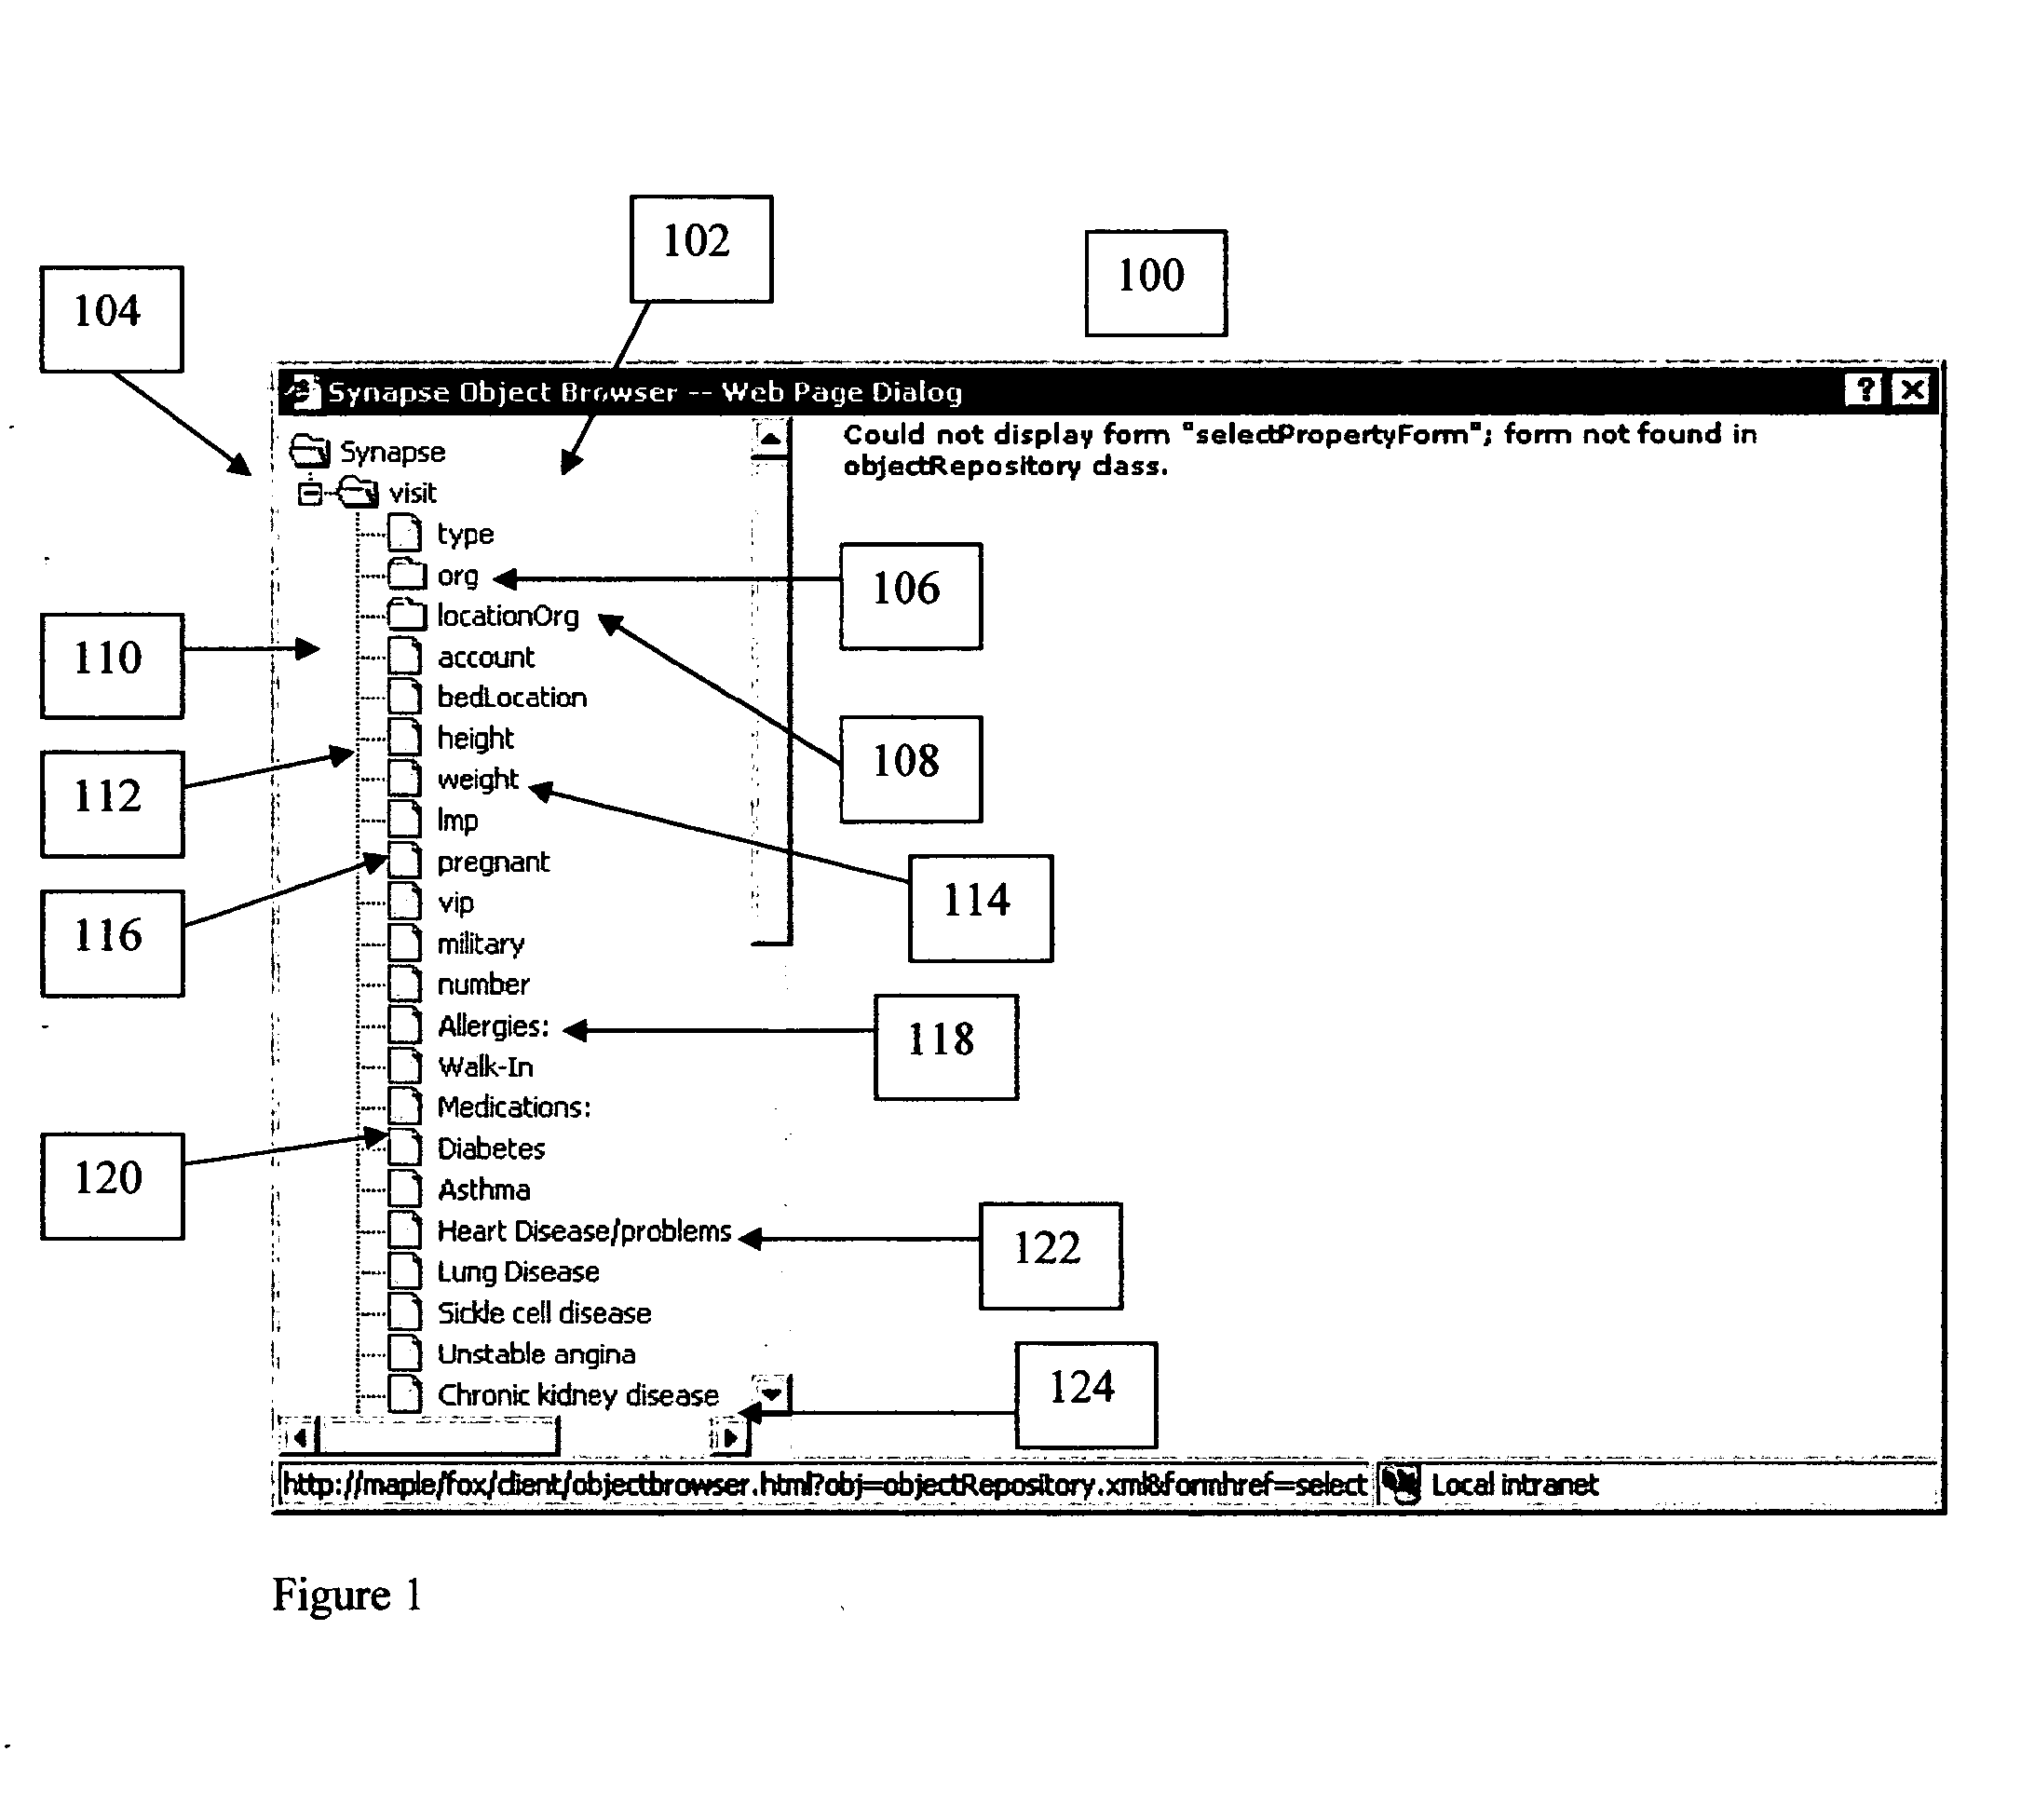 Method for communicating images and forms in a medical environment